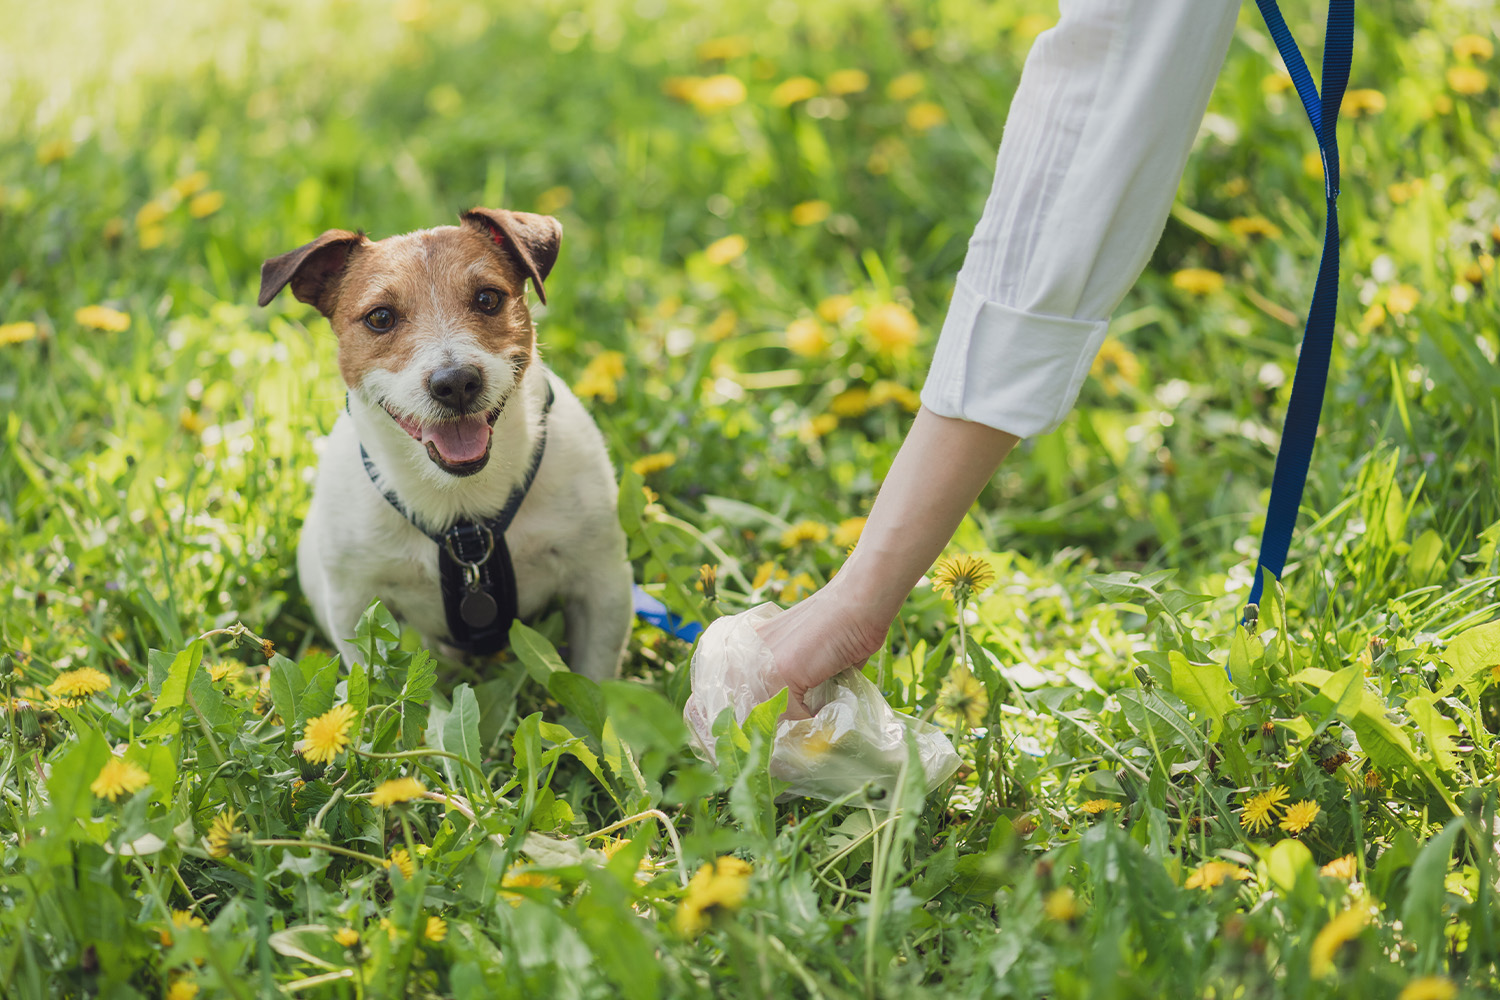 Why Do Dogs Kick the Grass After They Poop?